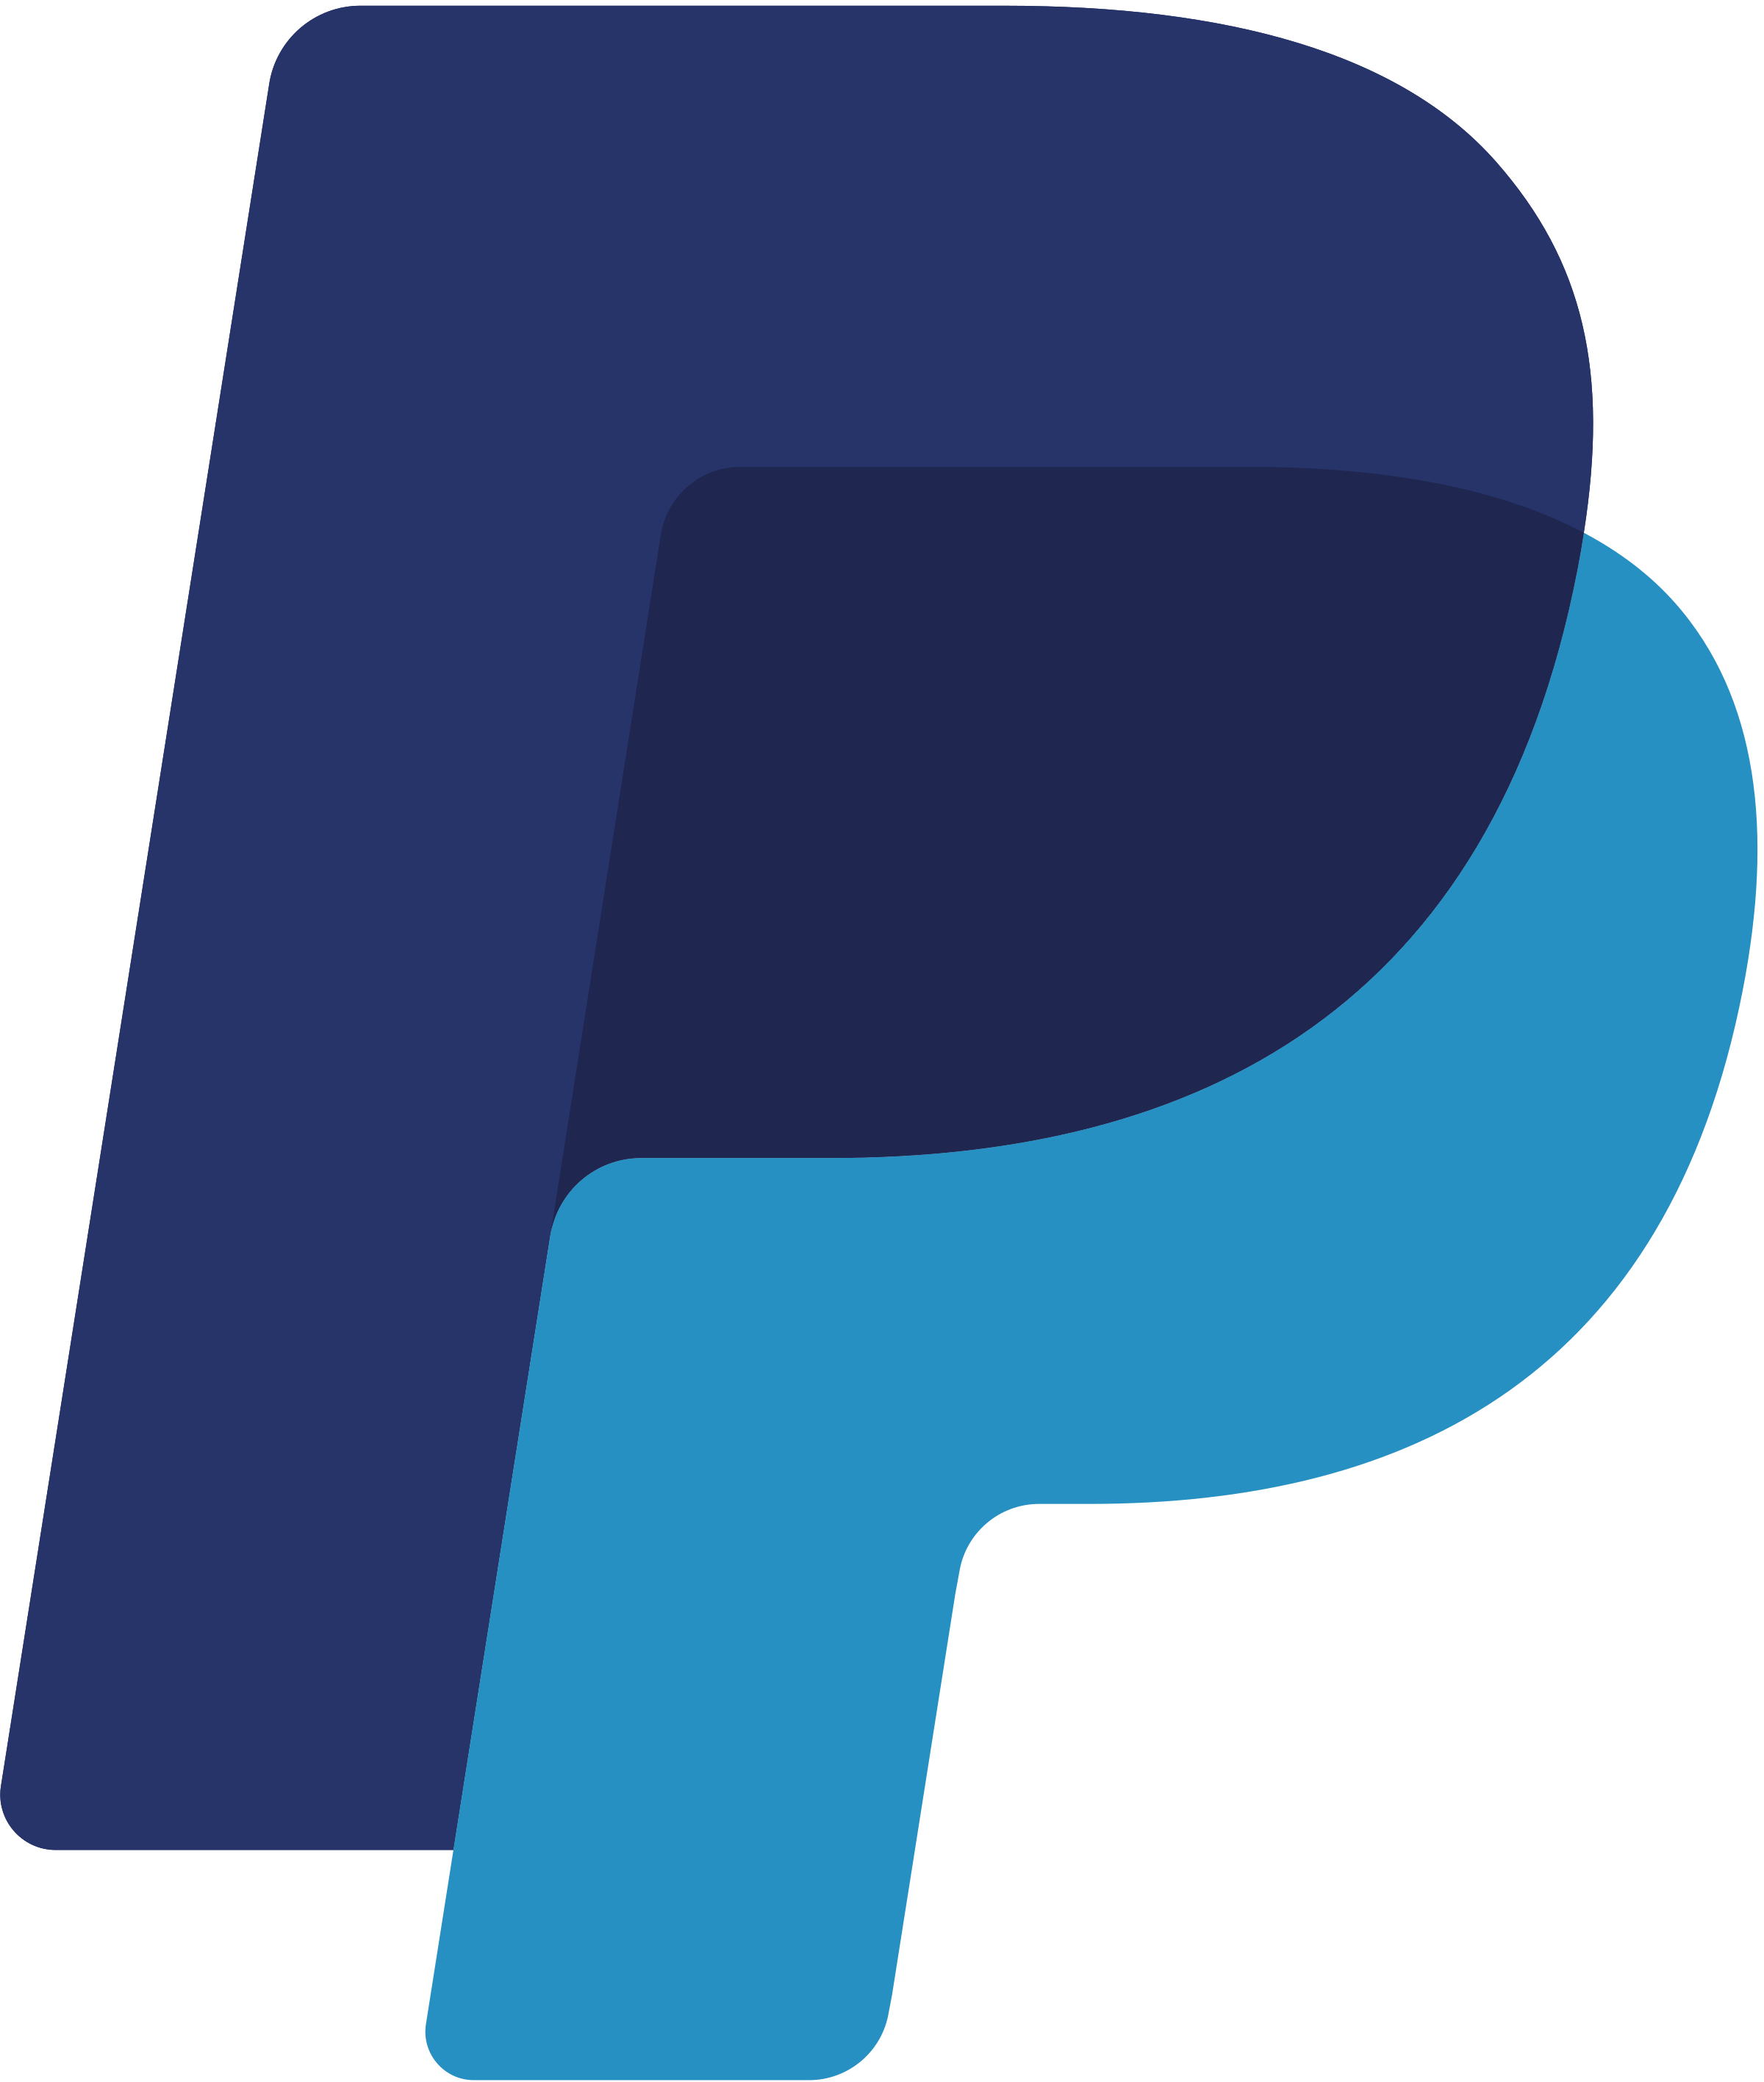 PayPal Logo - PayPal icon Logo PNG Transparent & SVG Vector - Freebie Supply